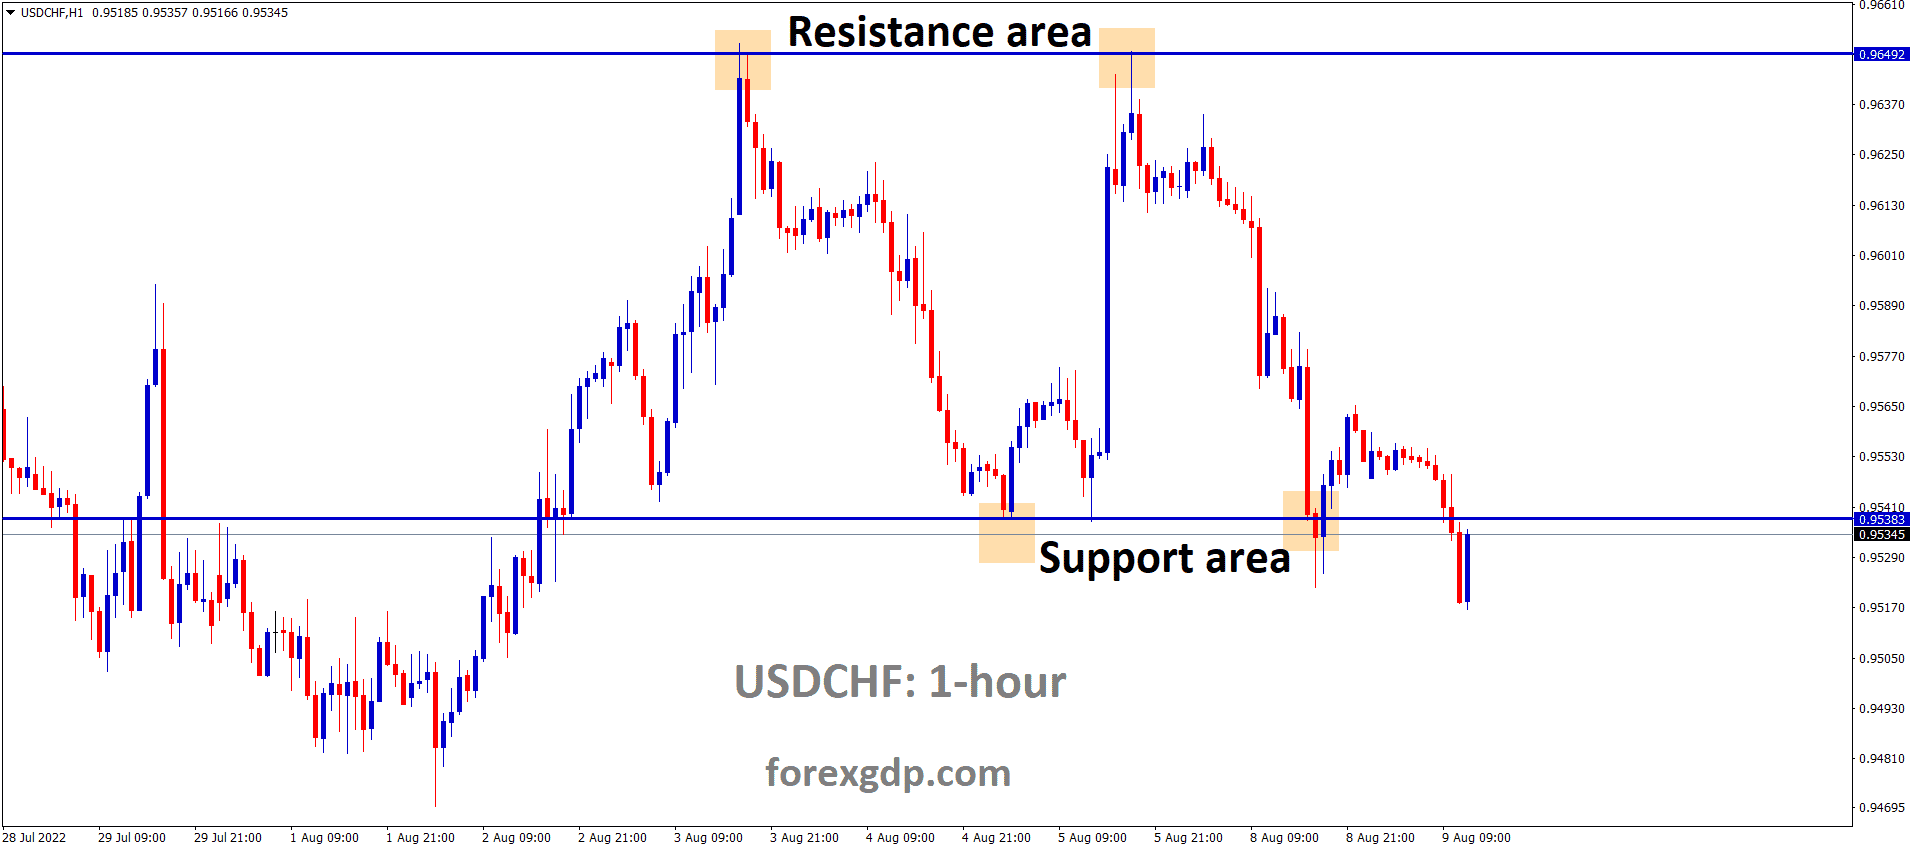 USDCHF is moving in the Box Pattern and the Market has reached the horizontal support area of the pattern.